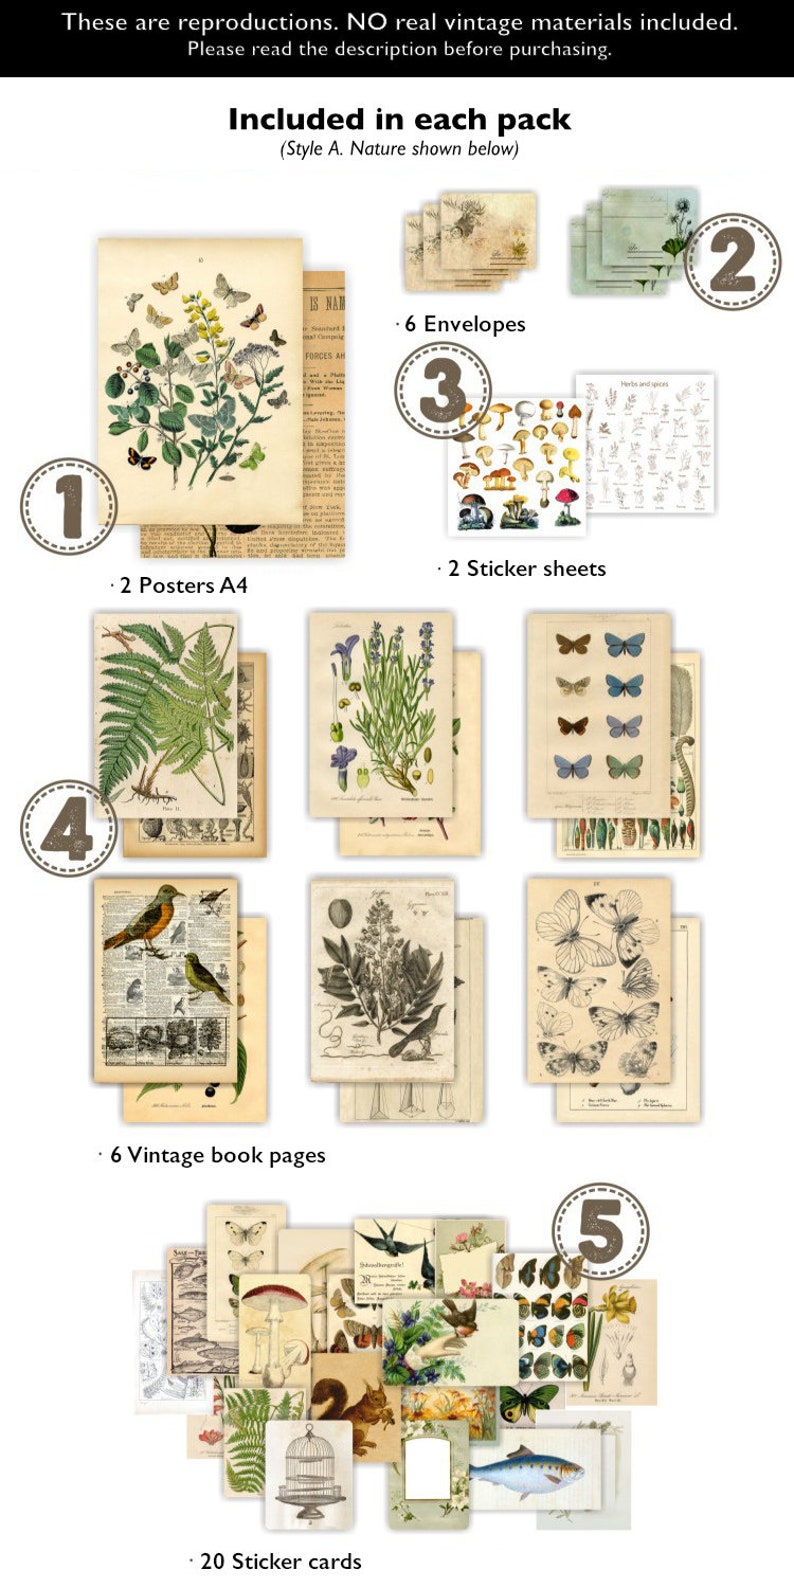 Material Packs by MOCARD Vintage Style Paper and Sticker Sets for Art Journaling, Junk Journals, Notebooks, Paper Crafts, Reproductions image 8